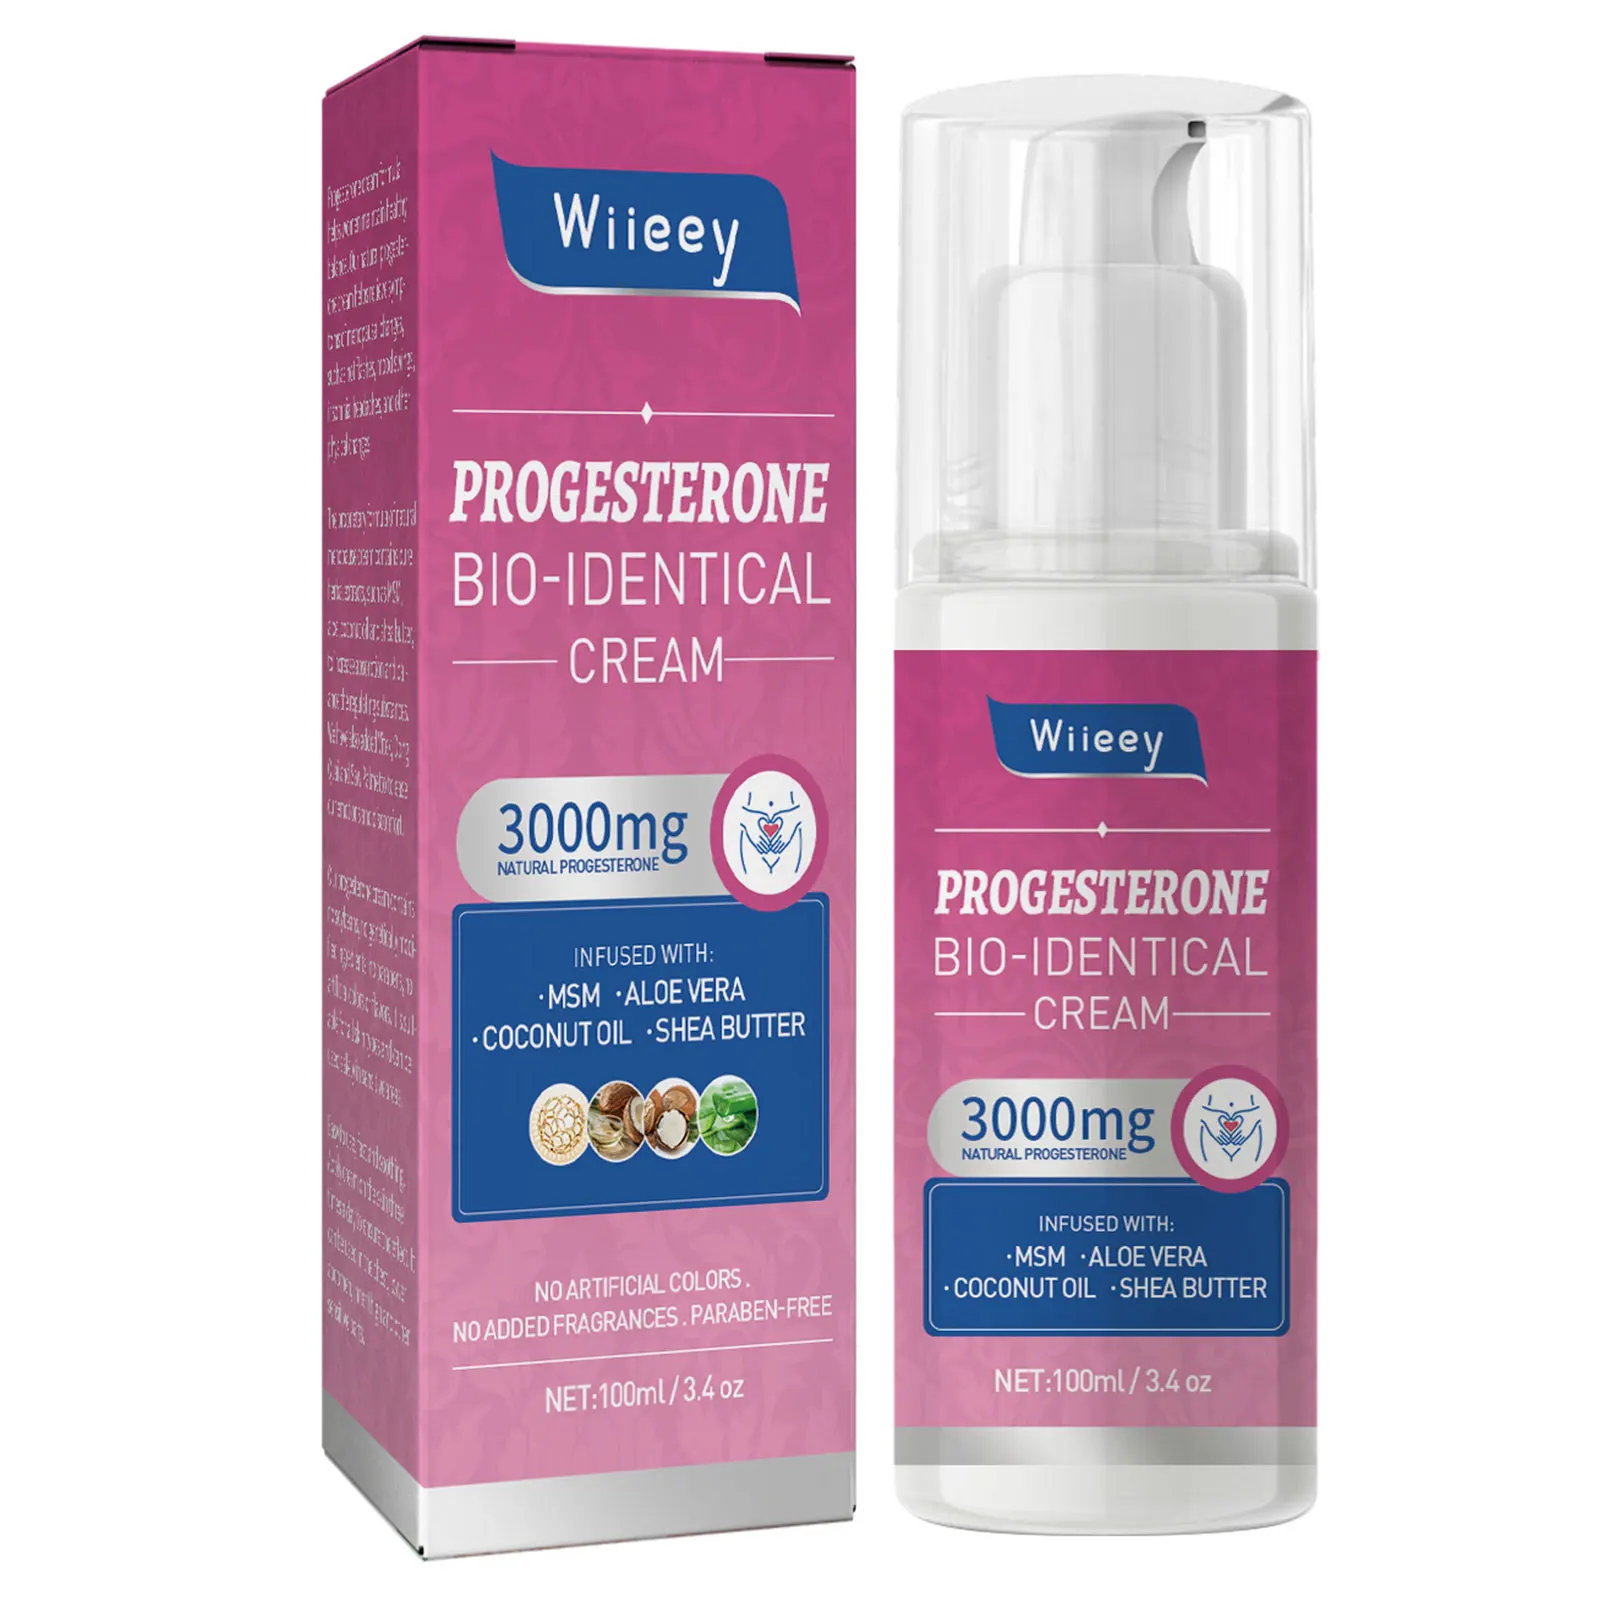 Identical Progesterone Cream Balancing Formula for Hormonal Imbalance Relieve PMS, Menopause, PCOS Symptoms